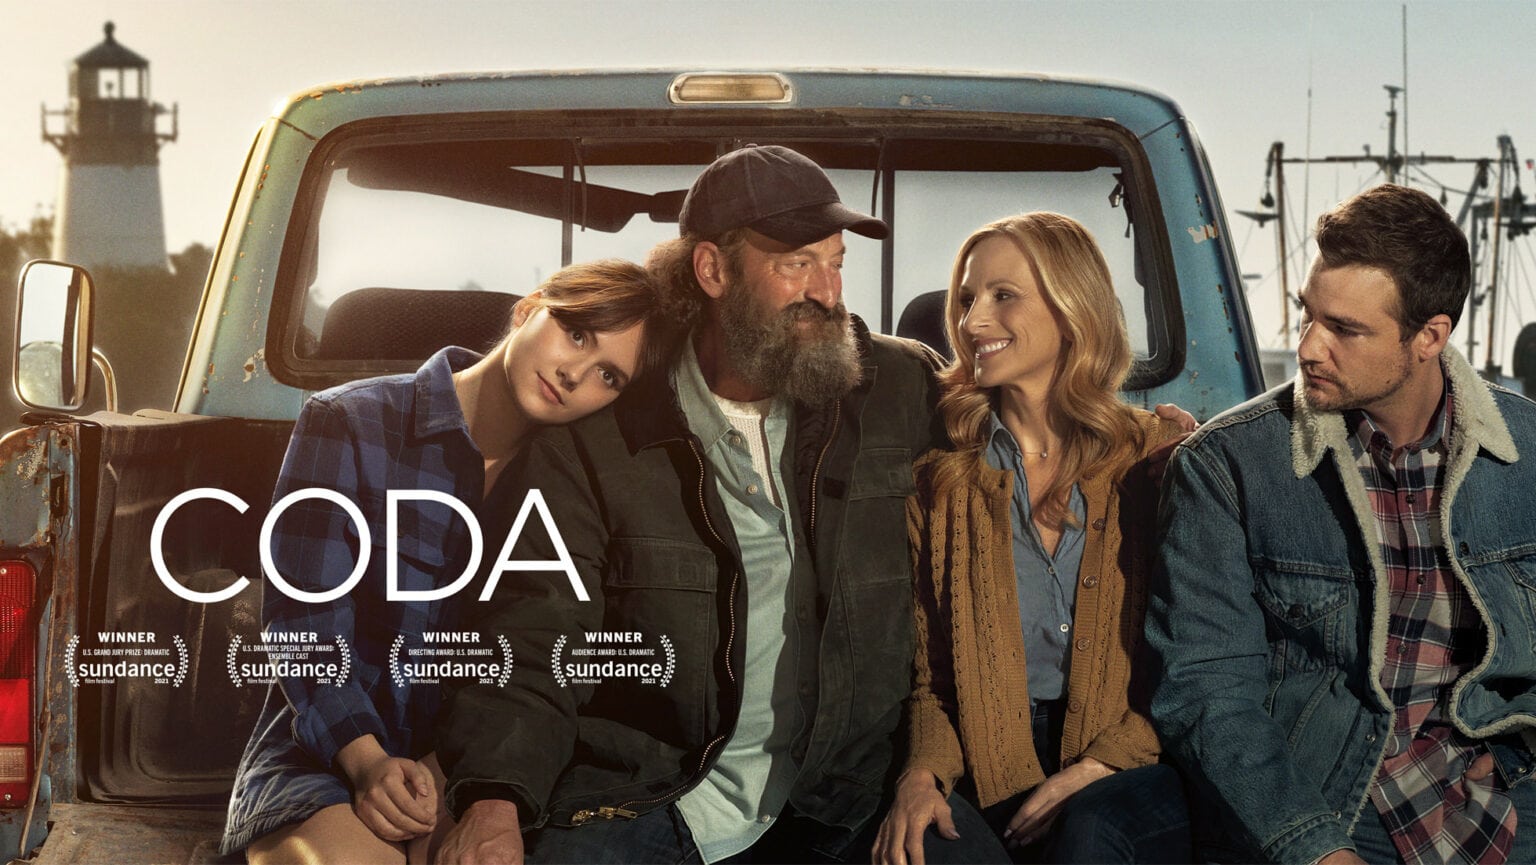 CODA will show for free in theaters from Friday, February 25 through 27.